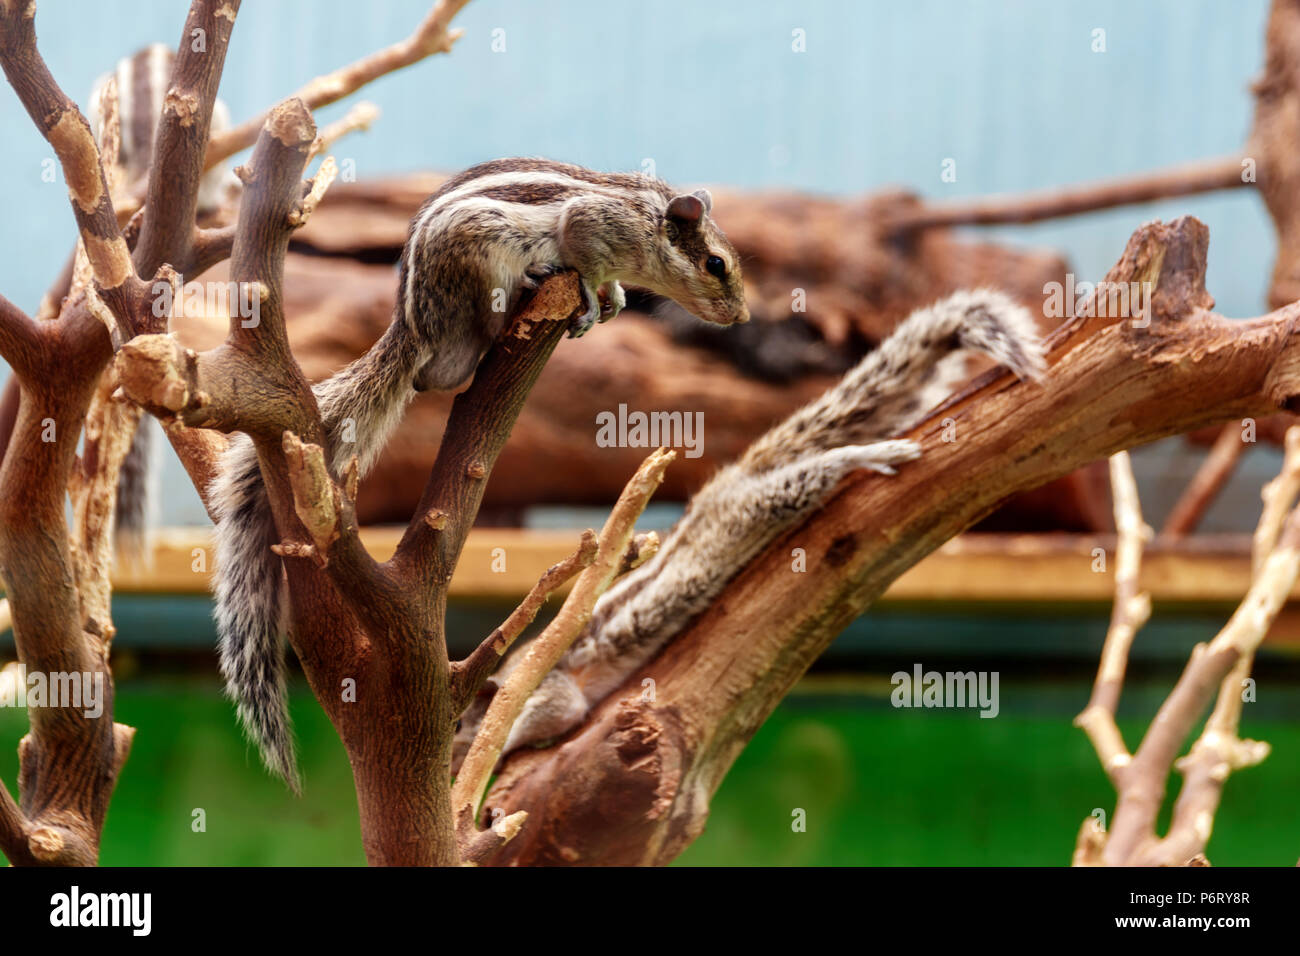 https://c8.alamy.com/comp/P6RY8R/chipmunks-playing-on-dry-tree-branches-in-a-zoo-P6RY8R.jpg